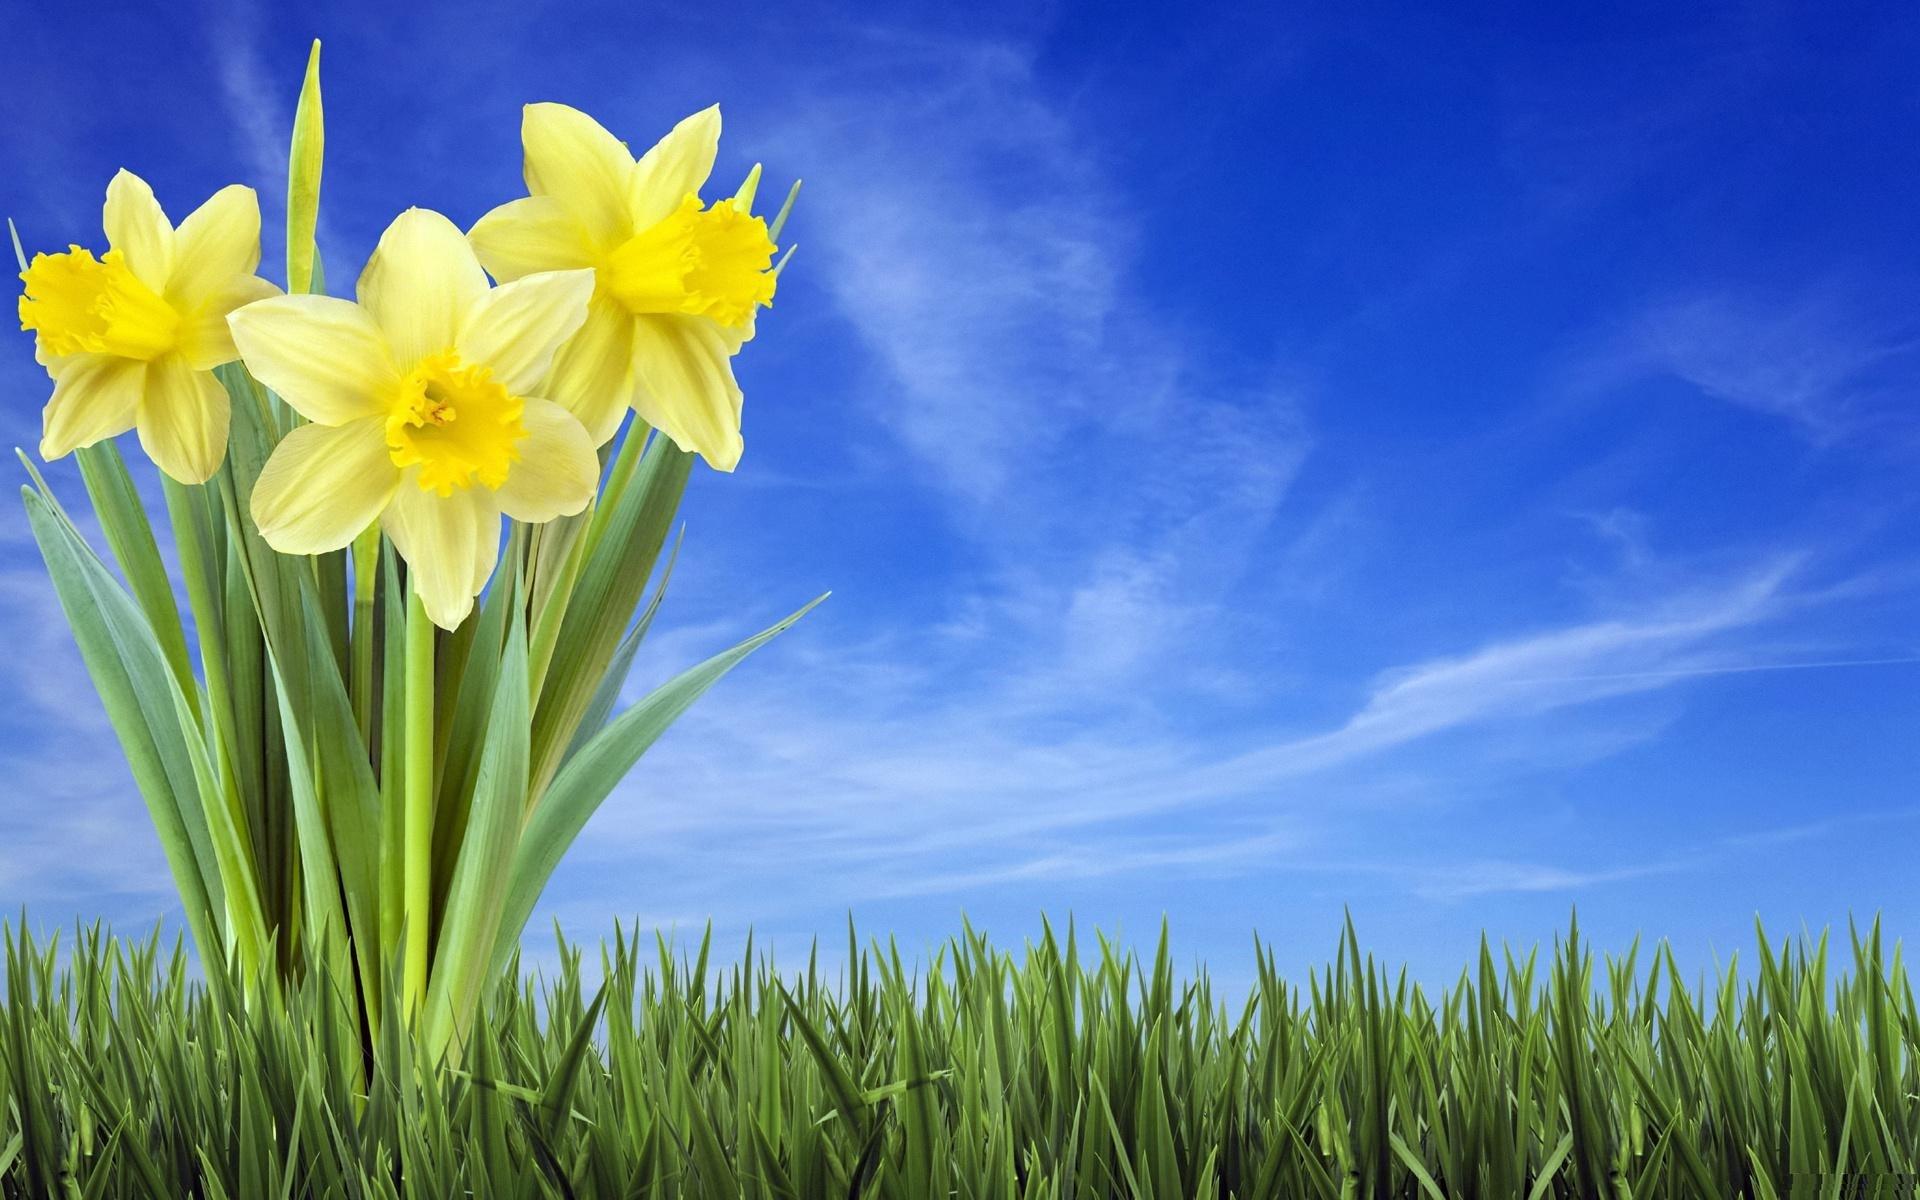 Daffodils, In, Grass, Fall, Photo, For, Desktop, Background